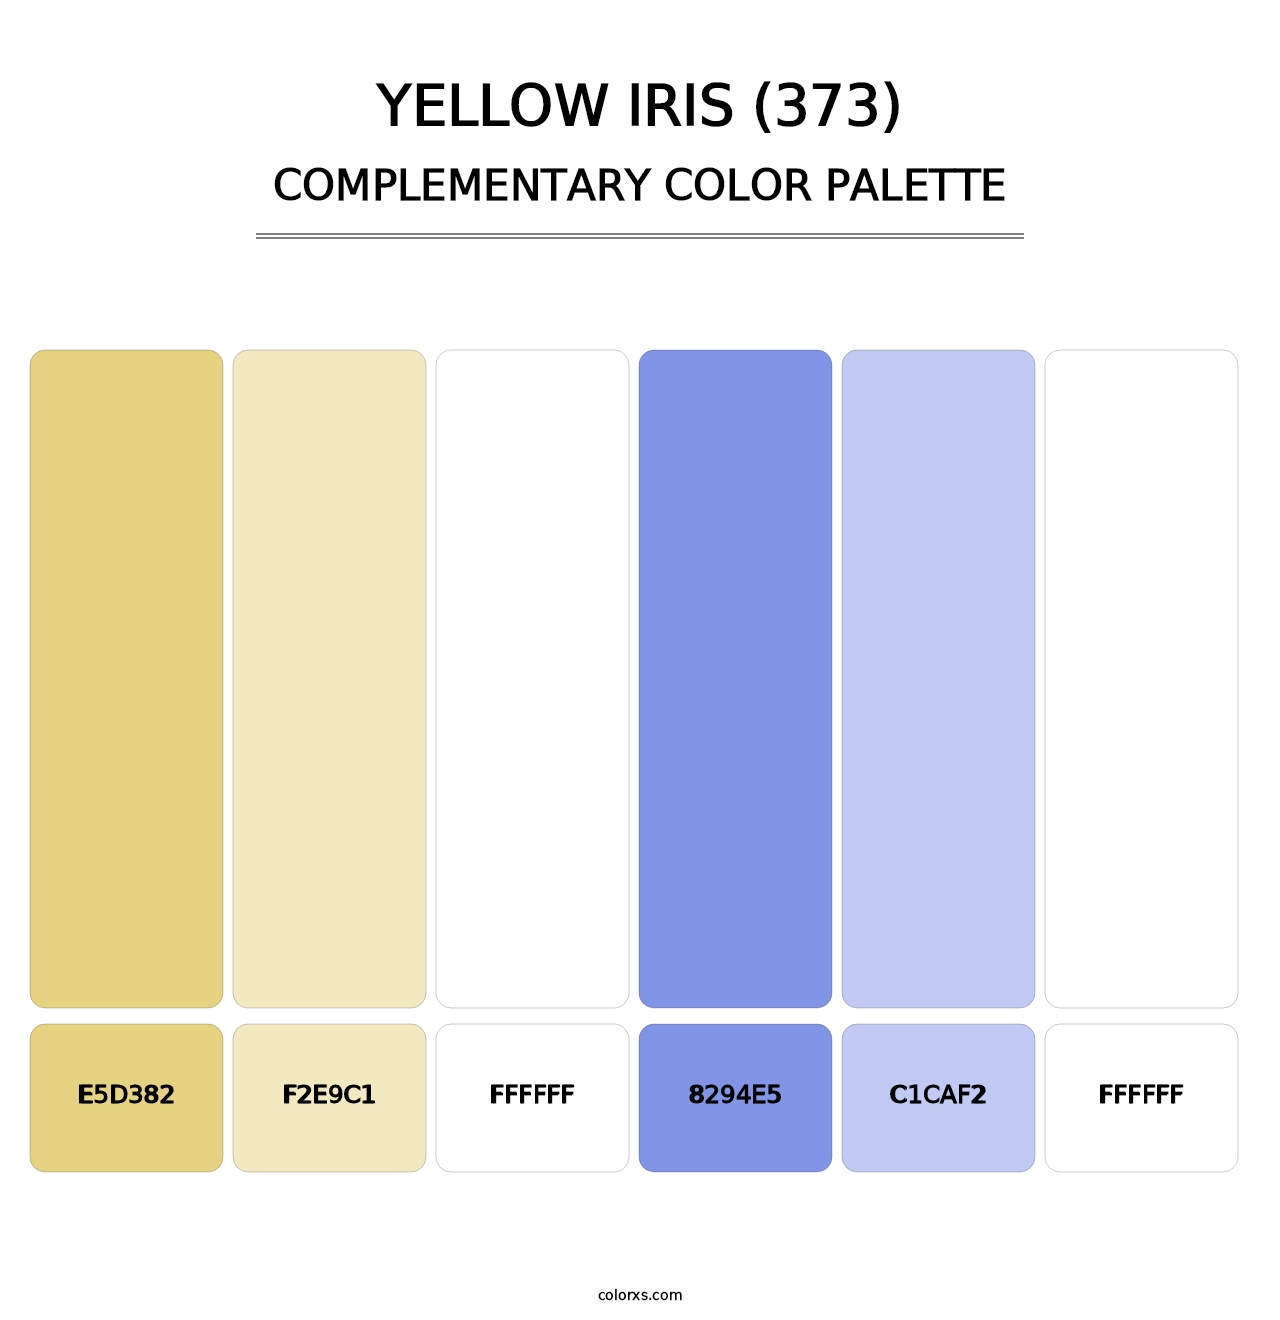 Yellow Iris (373) - Complementary Color Palette